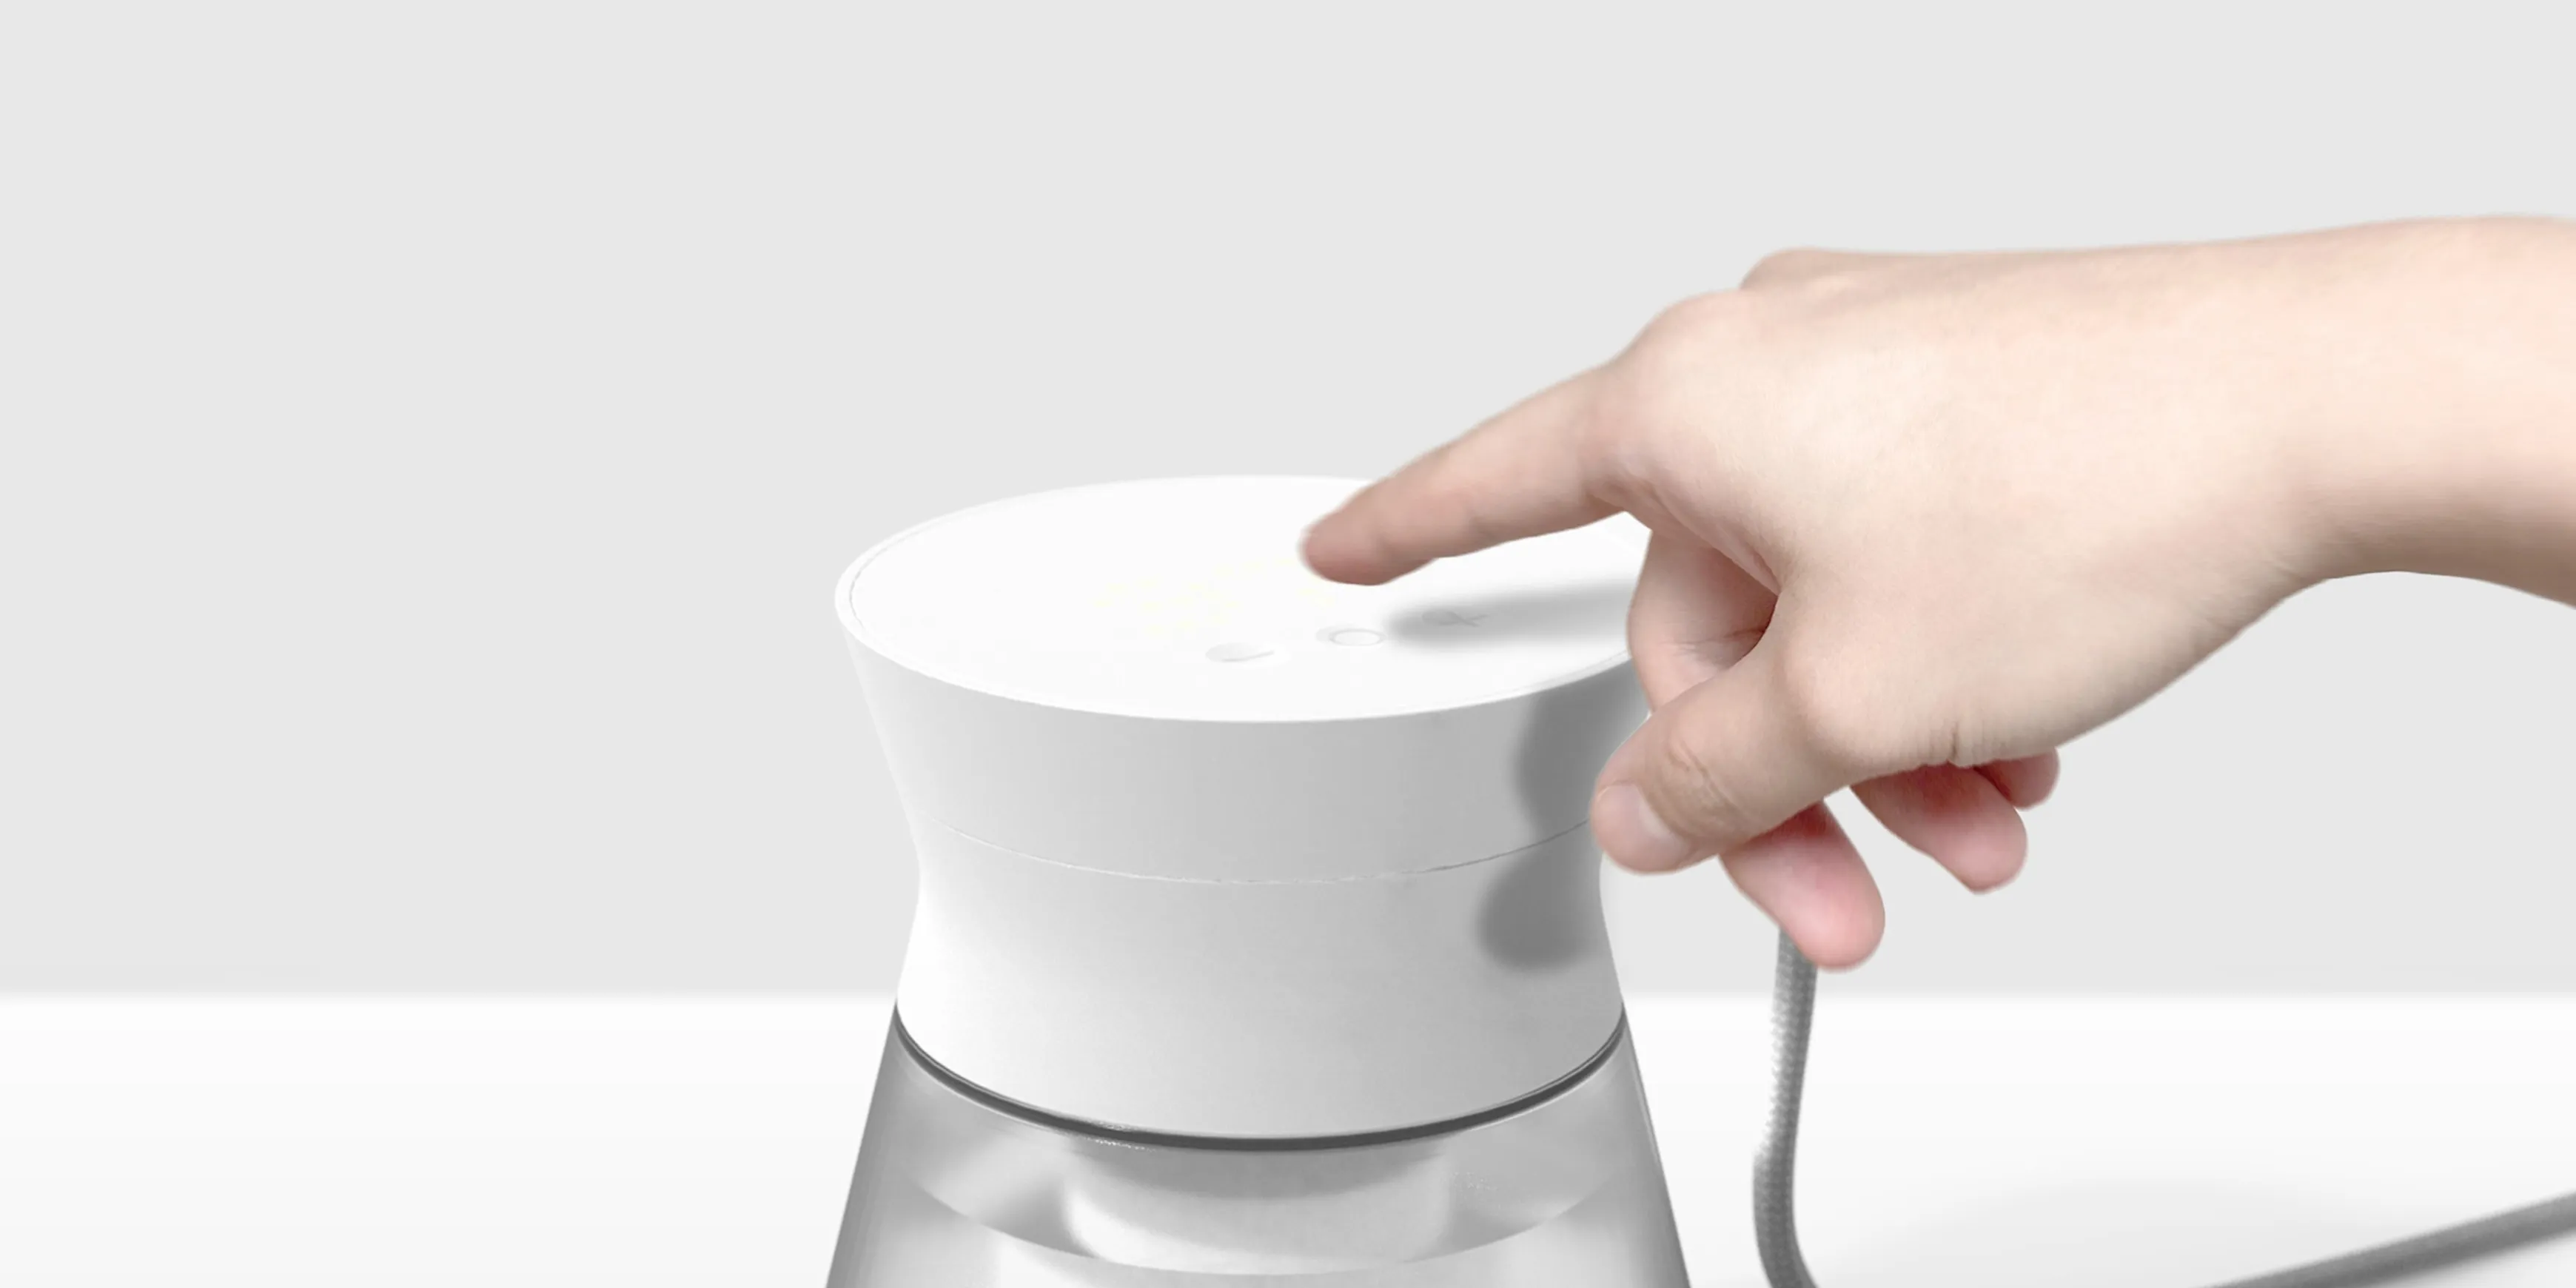 A Hand reaching out to press a button on the Intoku smart water kettle